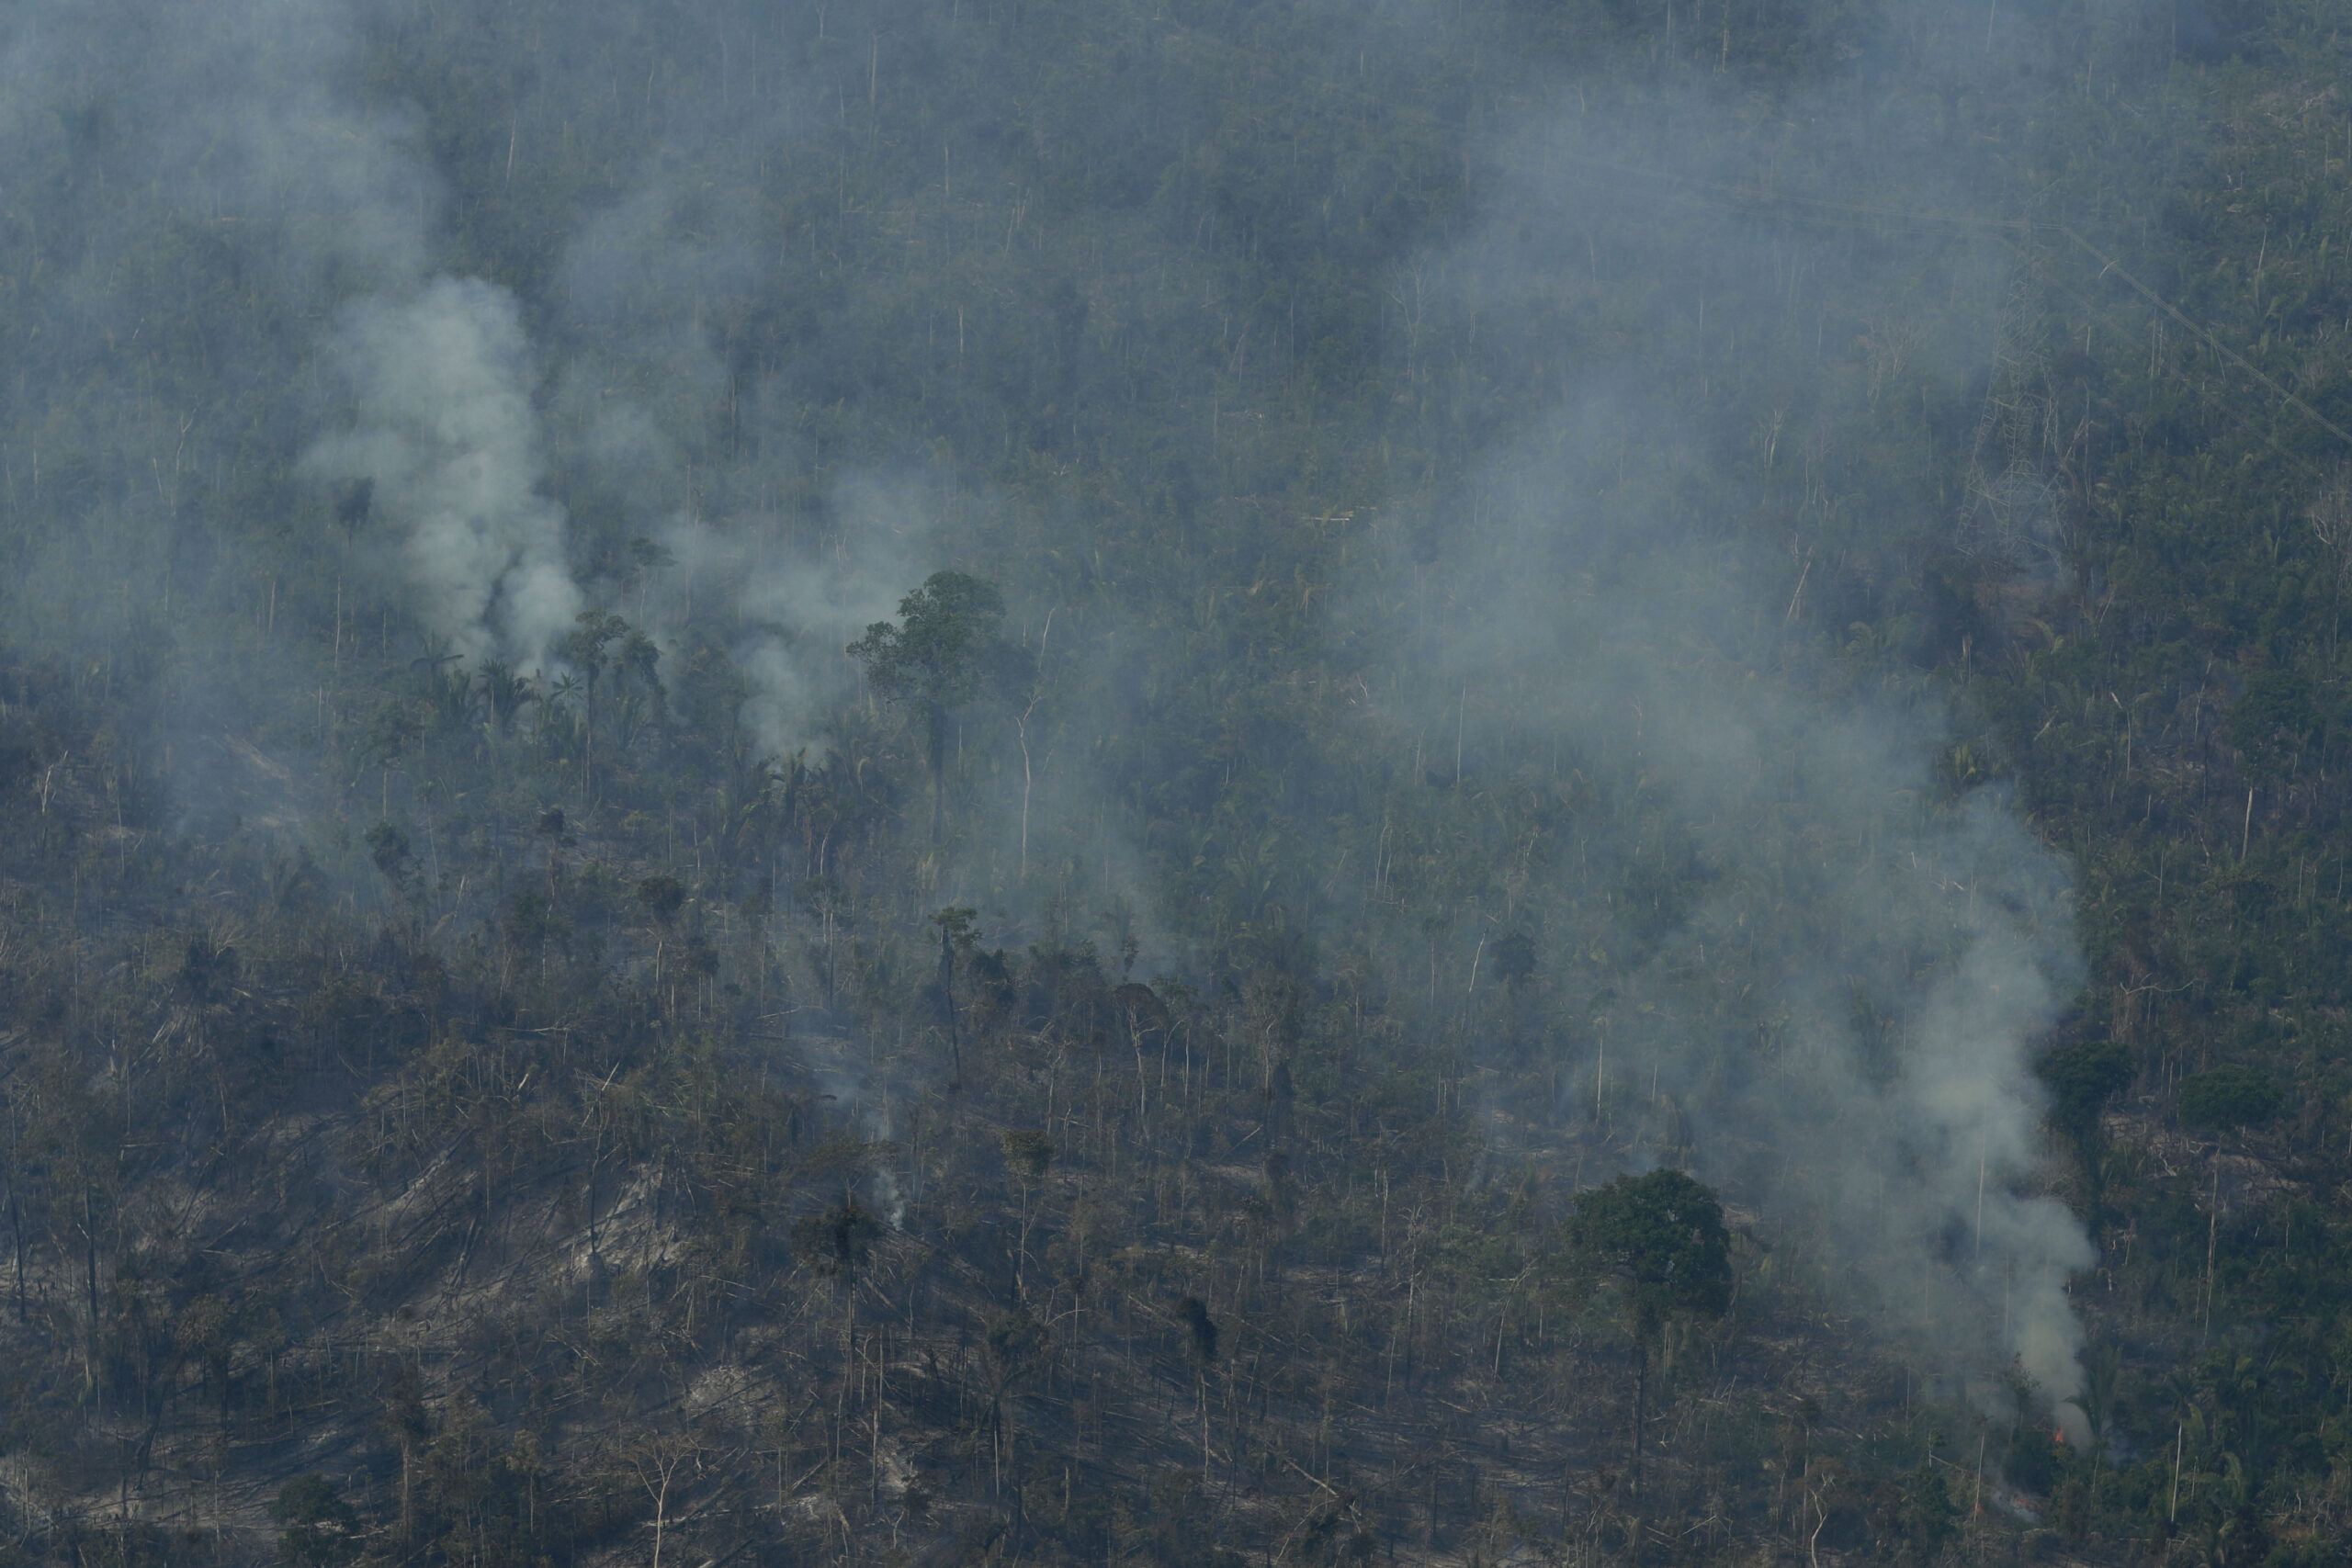 Fire consumes an area near Jaci Parana, state of Rondonia, Brazil, Saturday, Aug. 24, 2019. Brazil says military aircraft and 44,000 troops will be available to fight fires sweeping through parts of the Amazon region. The defense and environment ministers have outlined plans to battle the blazes that have prompted an international outcry as well as demonstrations in Brazil against President Jair Bolsonaro's handling of the environmental crisis. (AP Photo/Eraldo Peres)